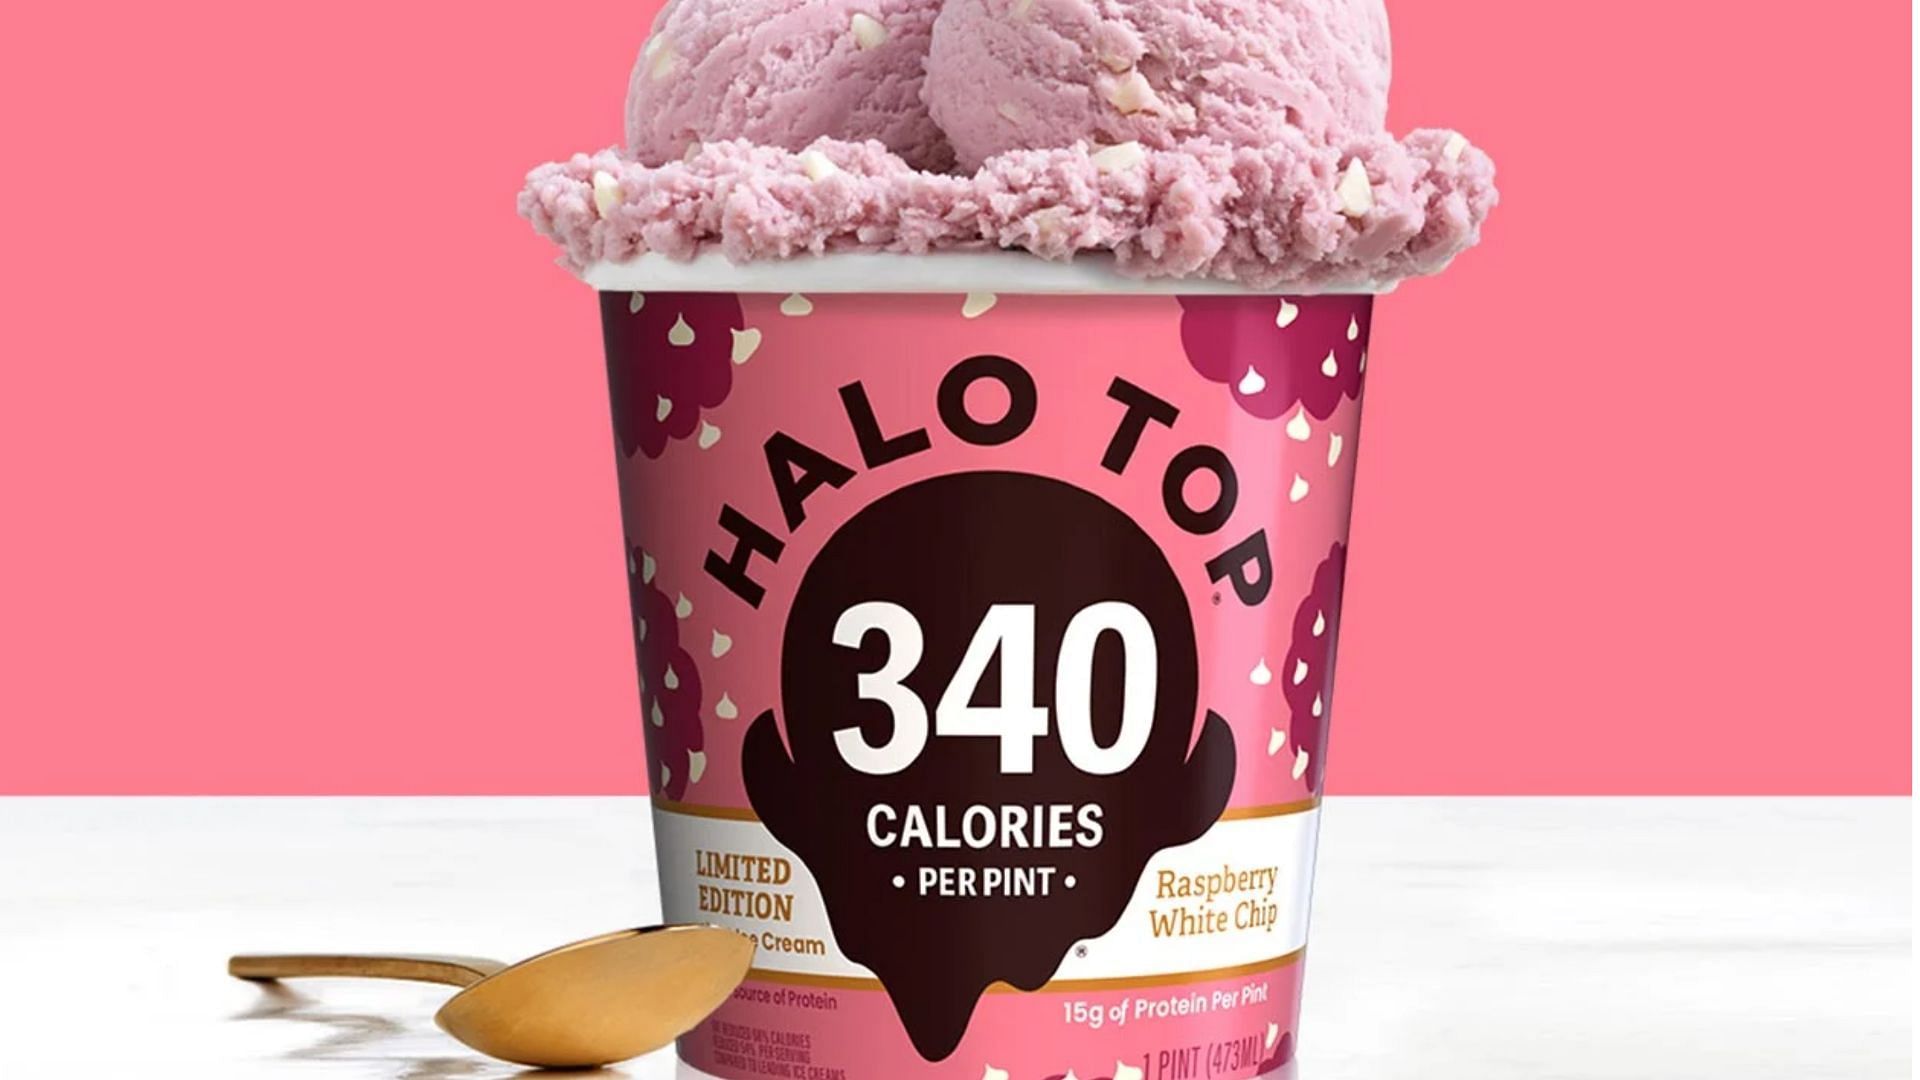 The new Raspberry White Chip ice cream is available for $4.99 per pint (Image via Halo Top Creamery)